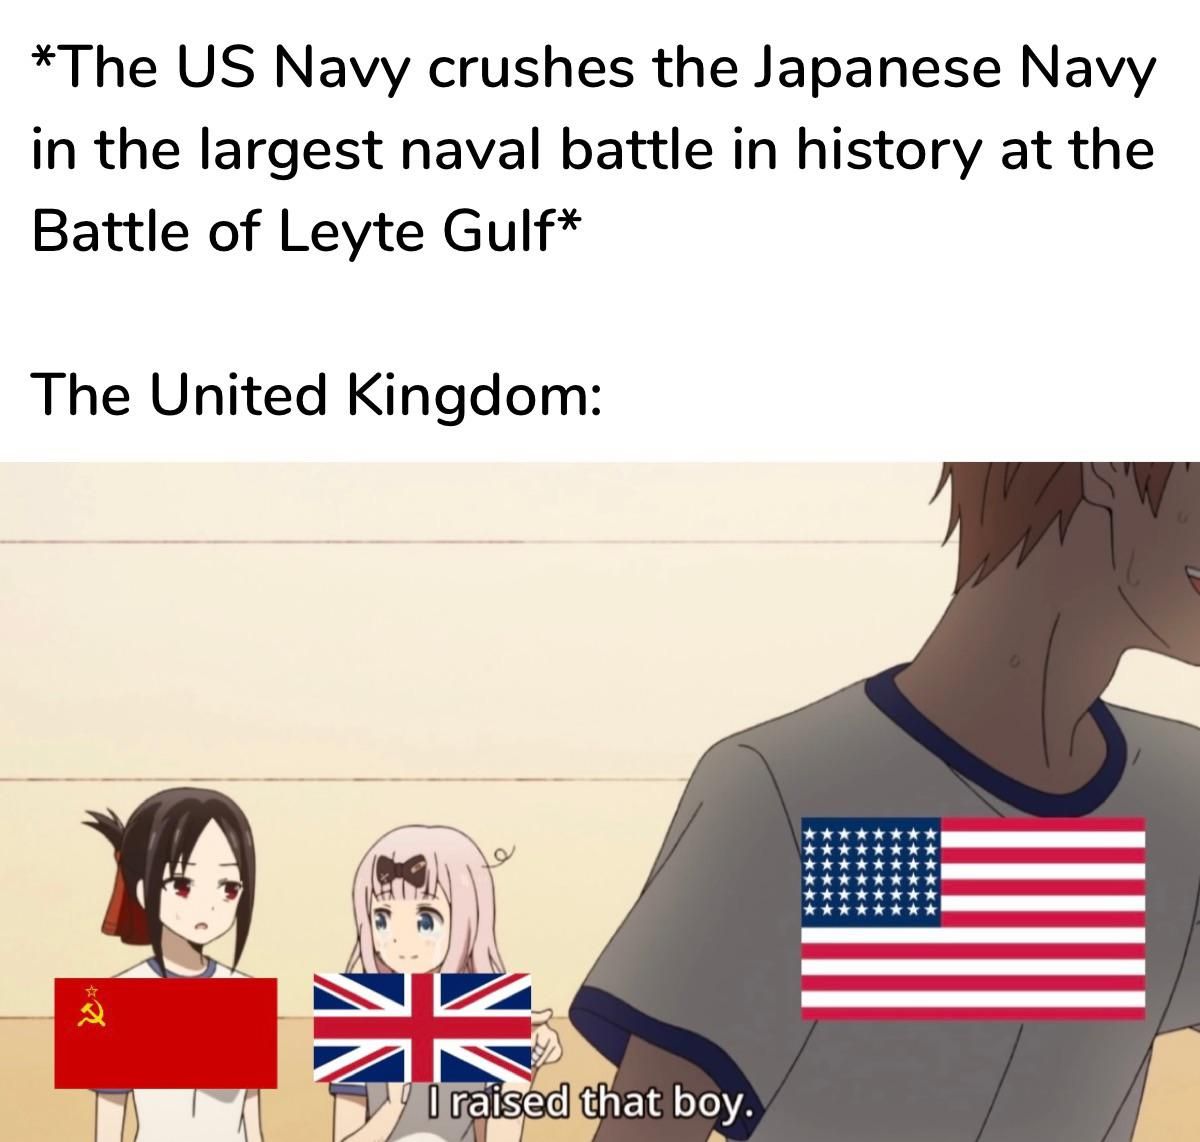 The United States inherited Britain’s naval prowess